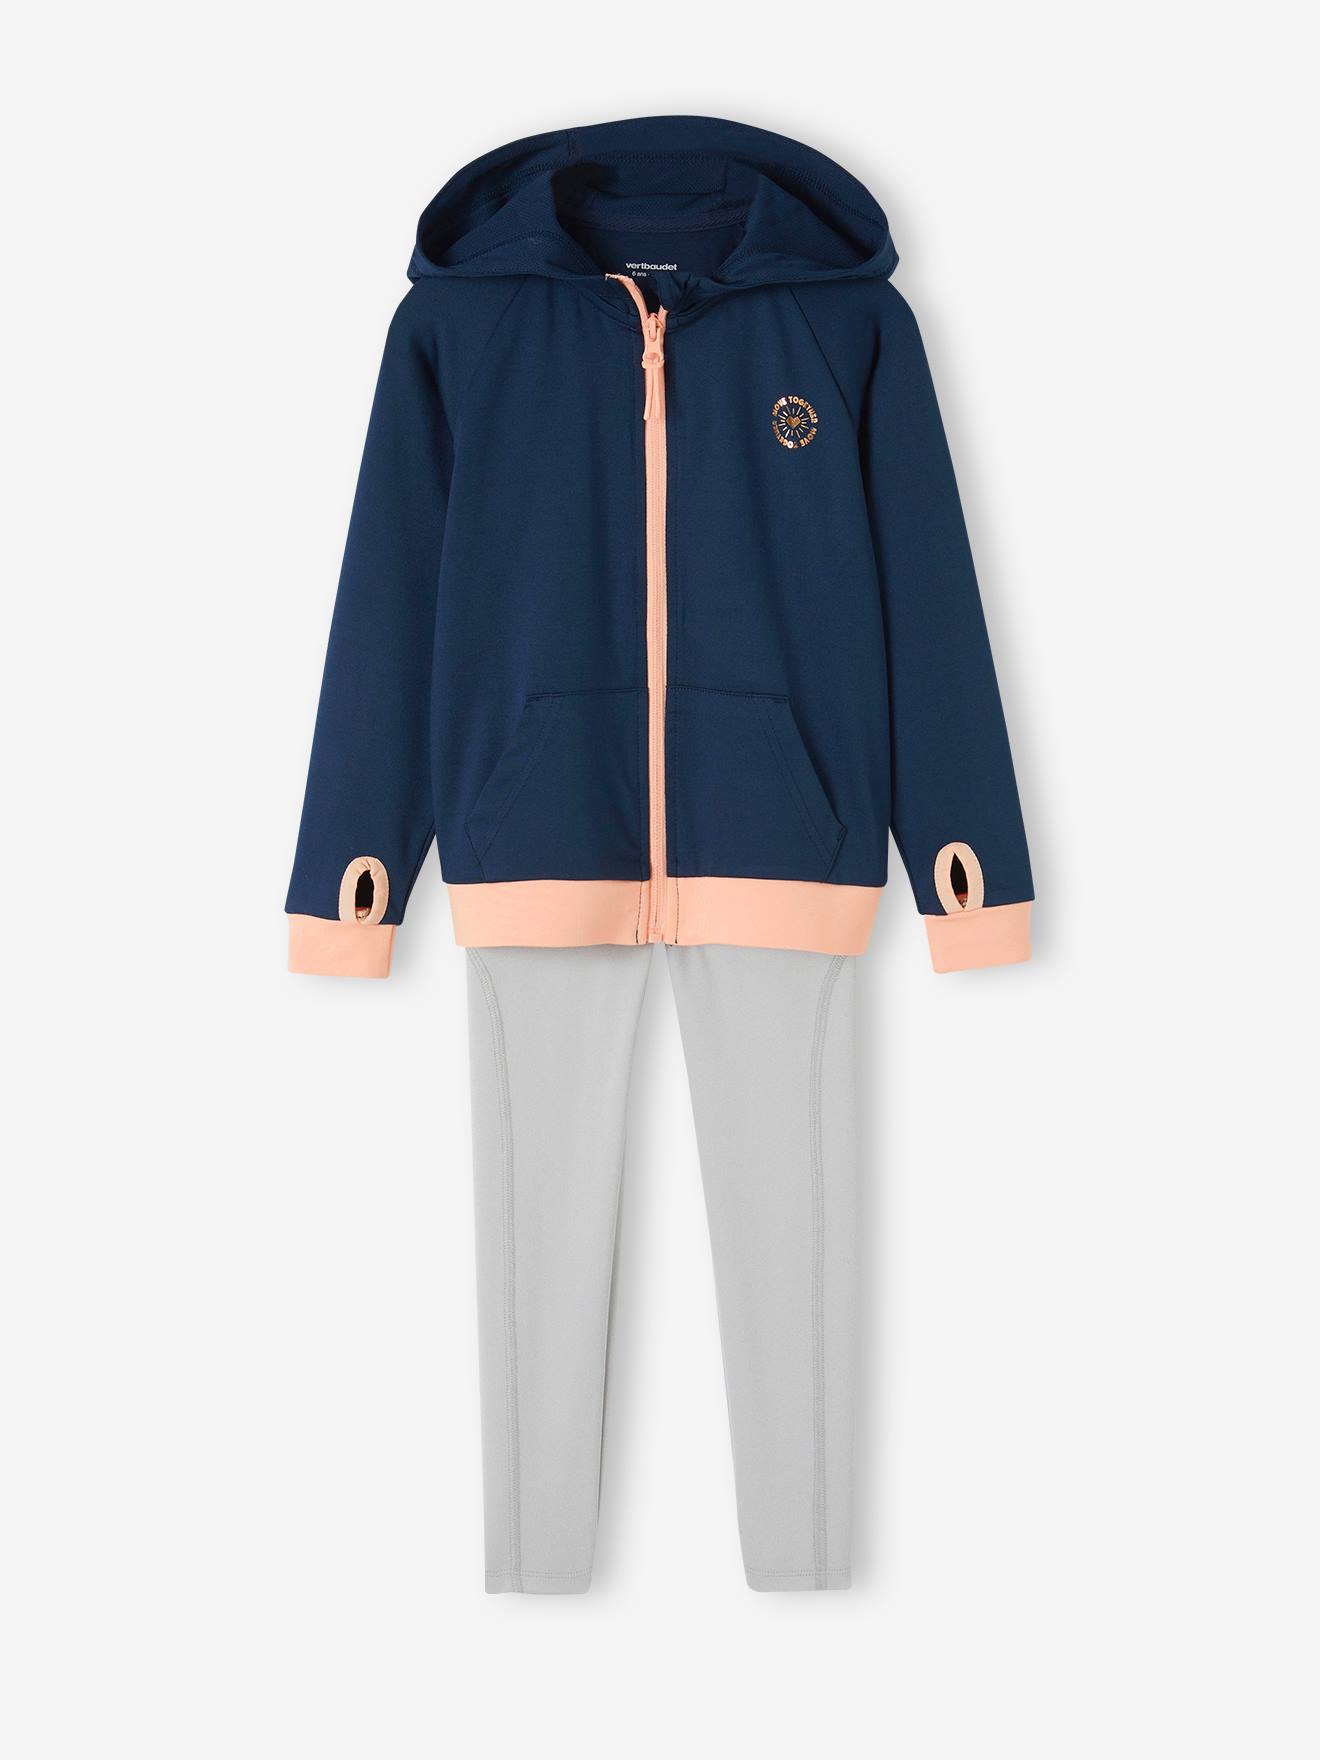 Sports Combo, Zipped Jacket & Leggings in Techno Fabric, for Girls navy blue